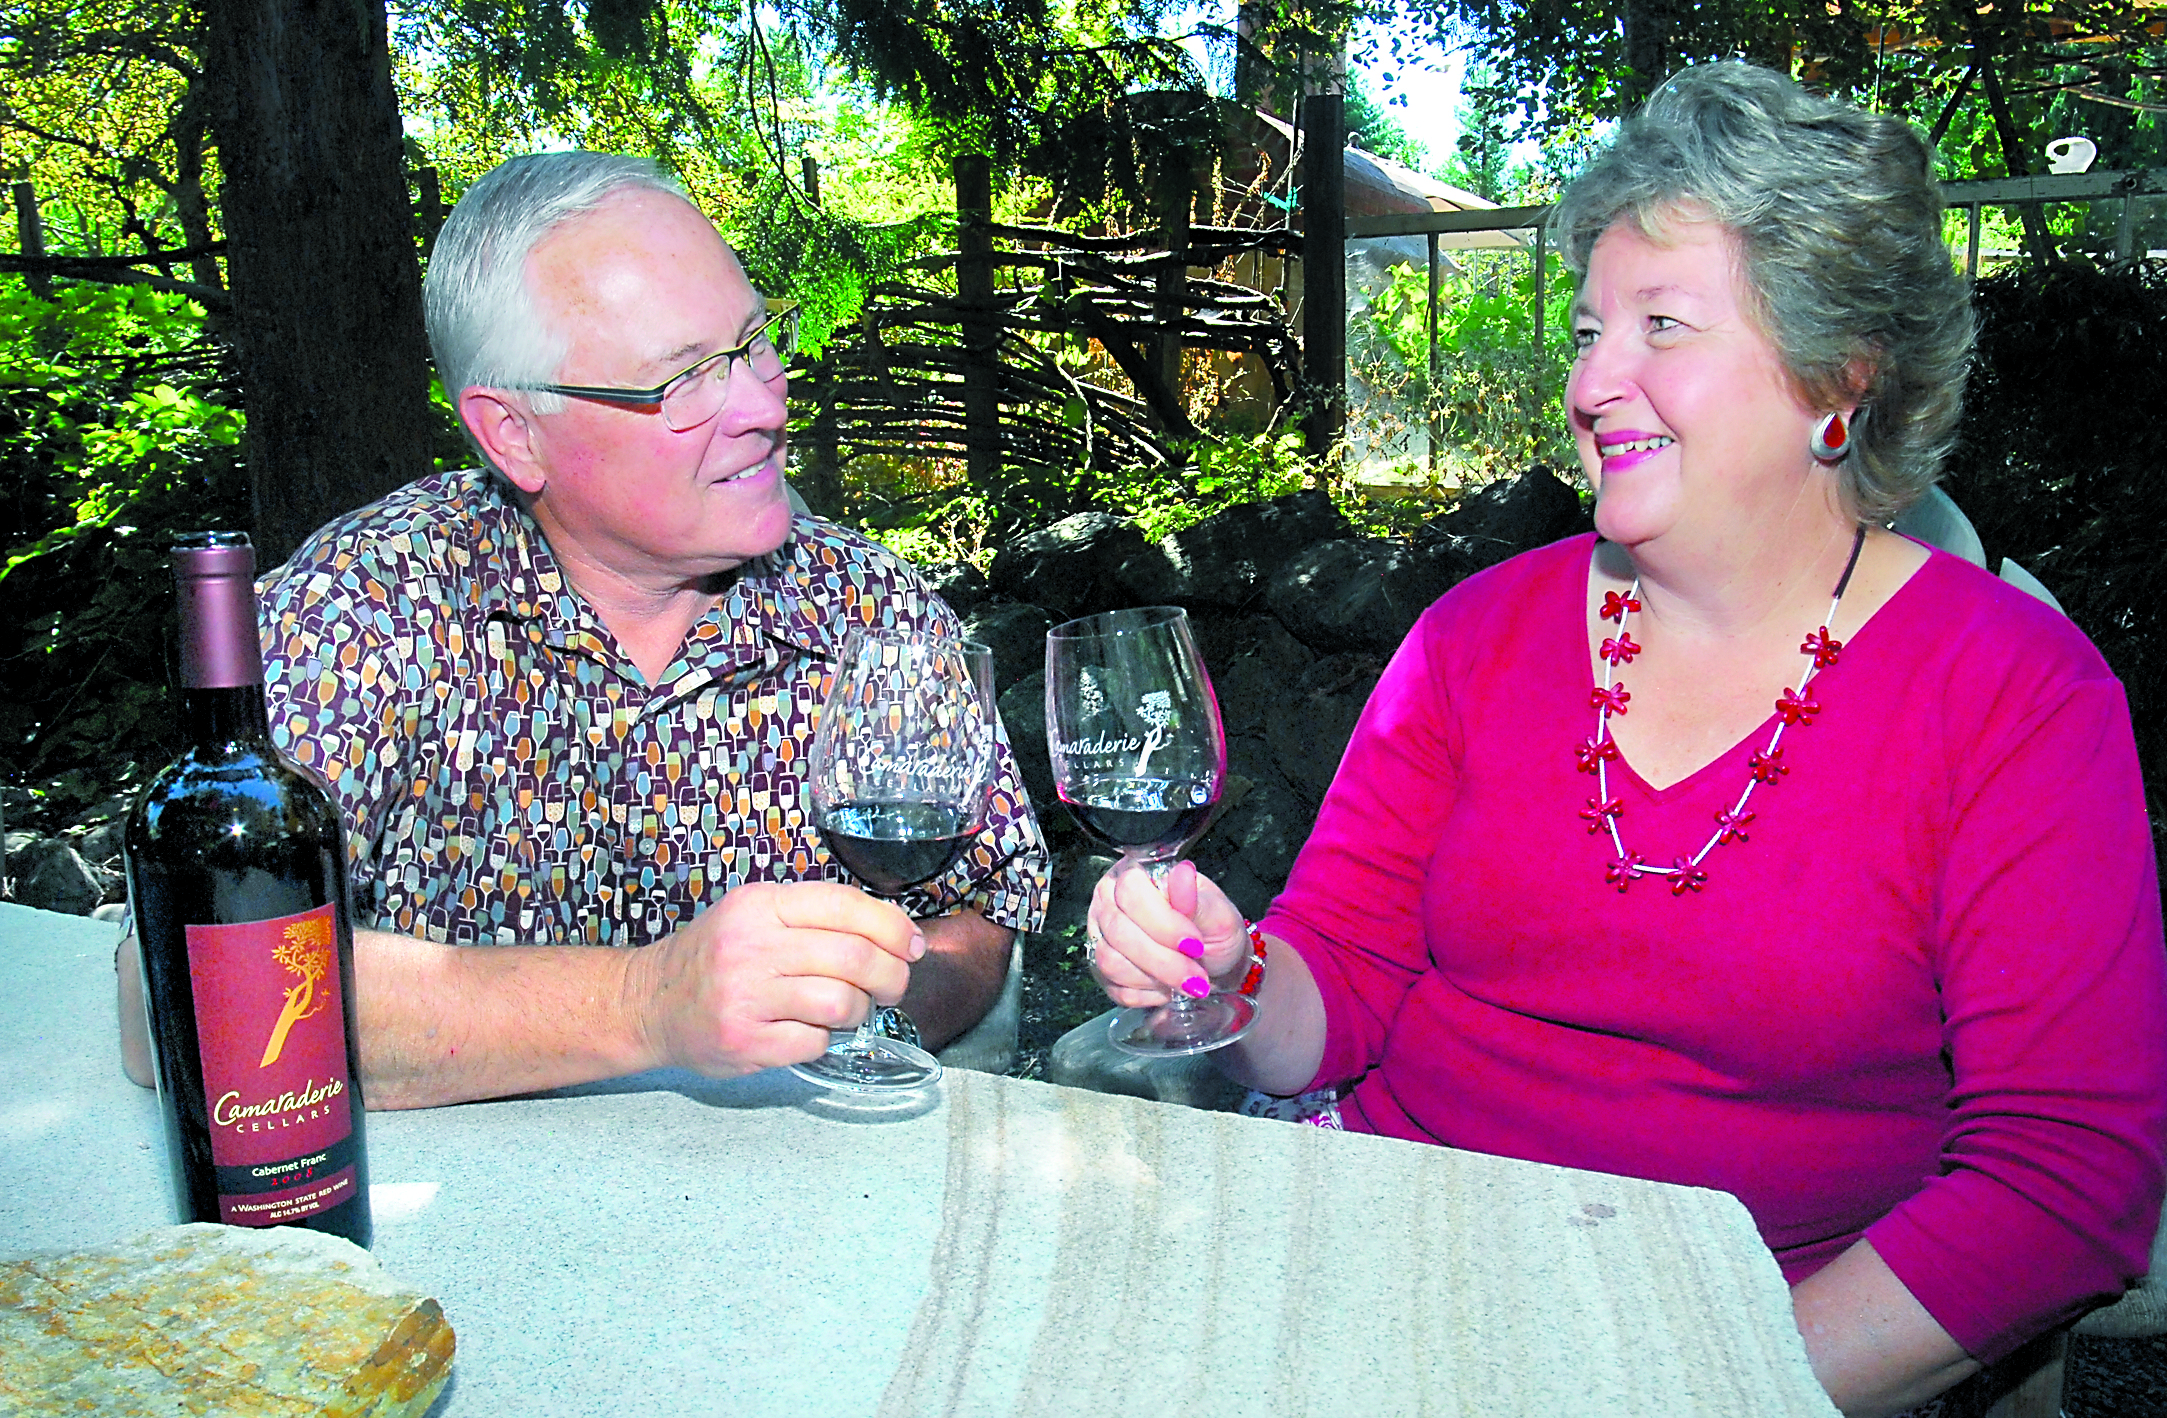 Camaraderie Cellars owners Don and Vicki Corson are celebrating 20 years of winemaking in Port Angeles. Keith Thorpe/Peninsula Daily News